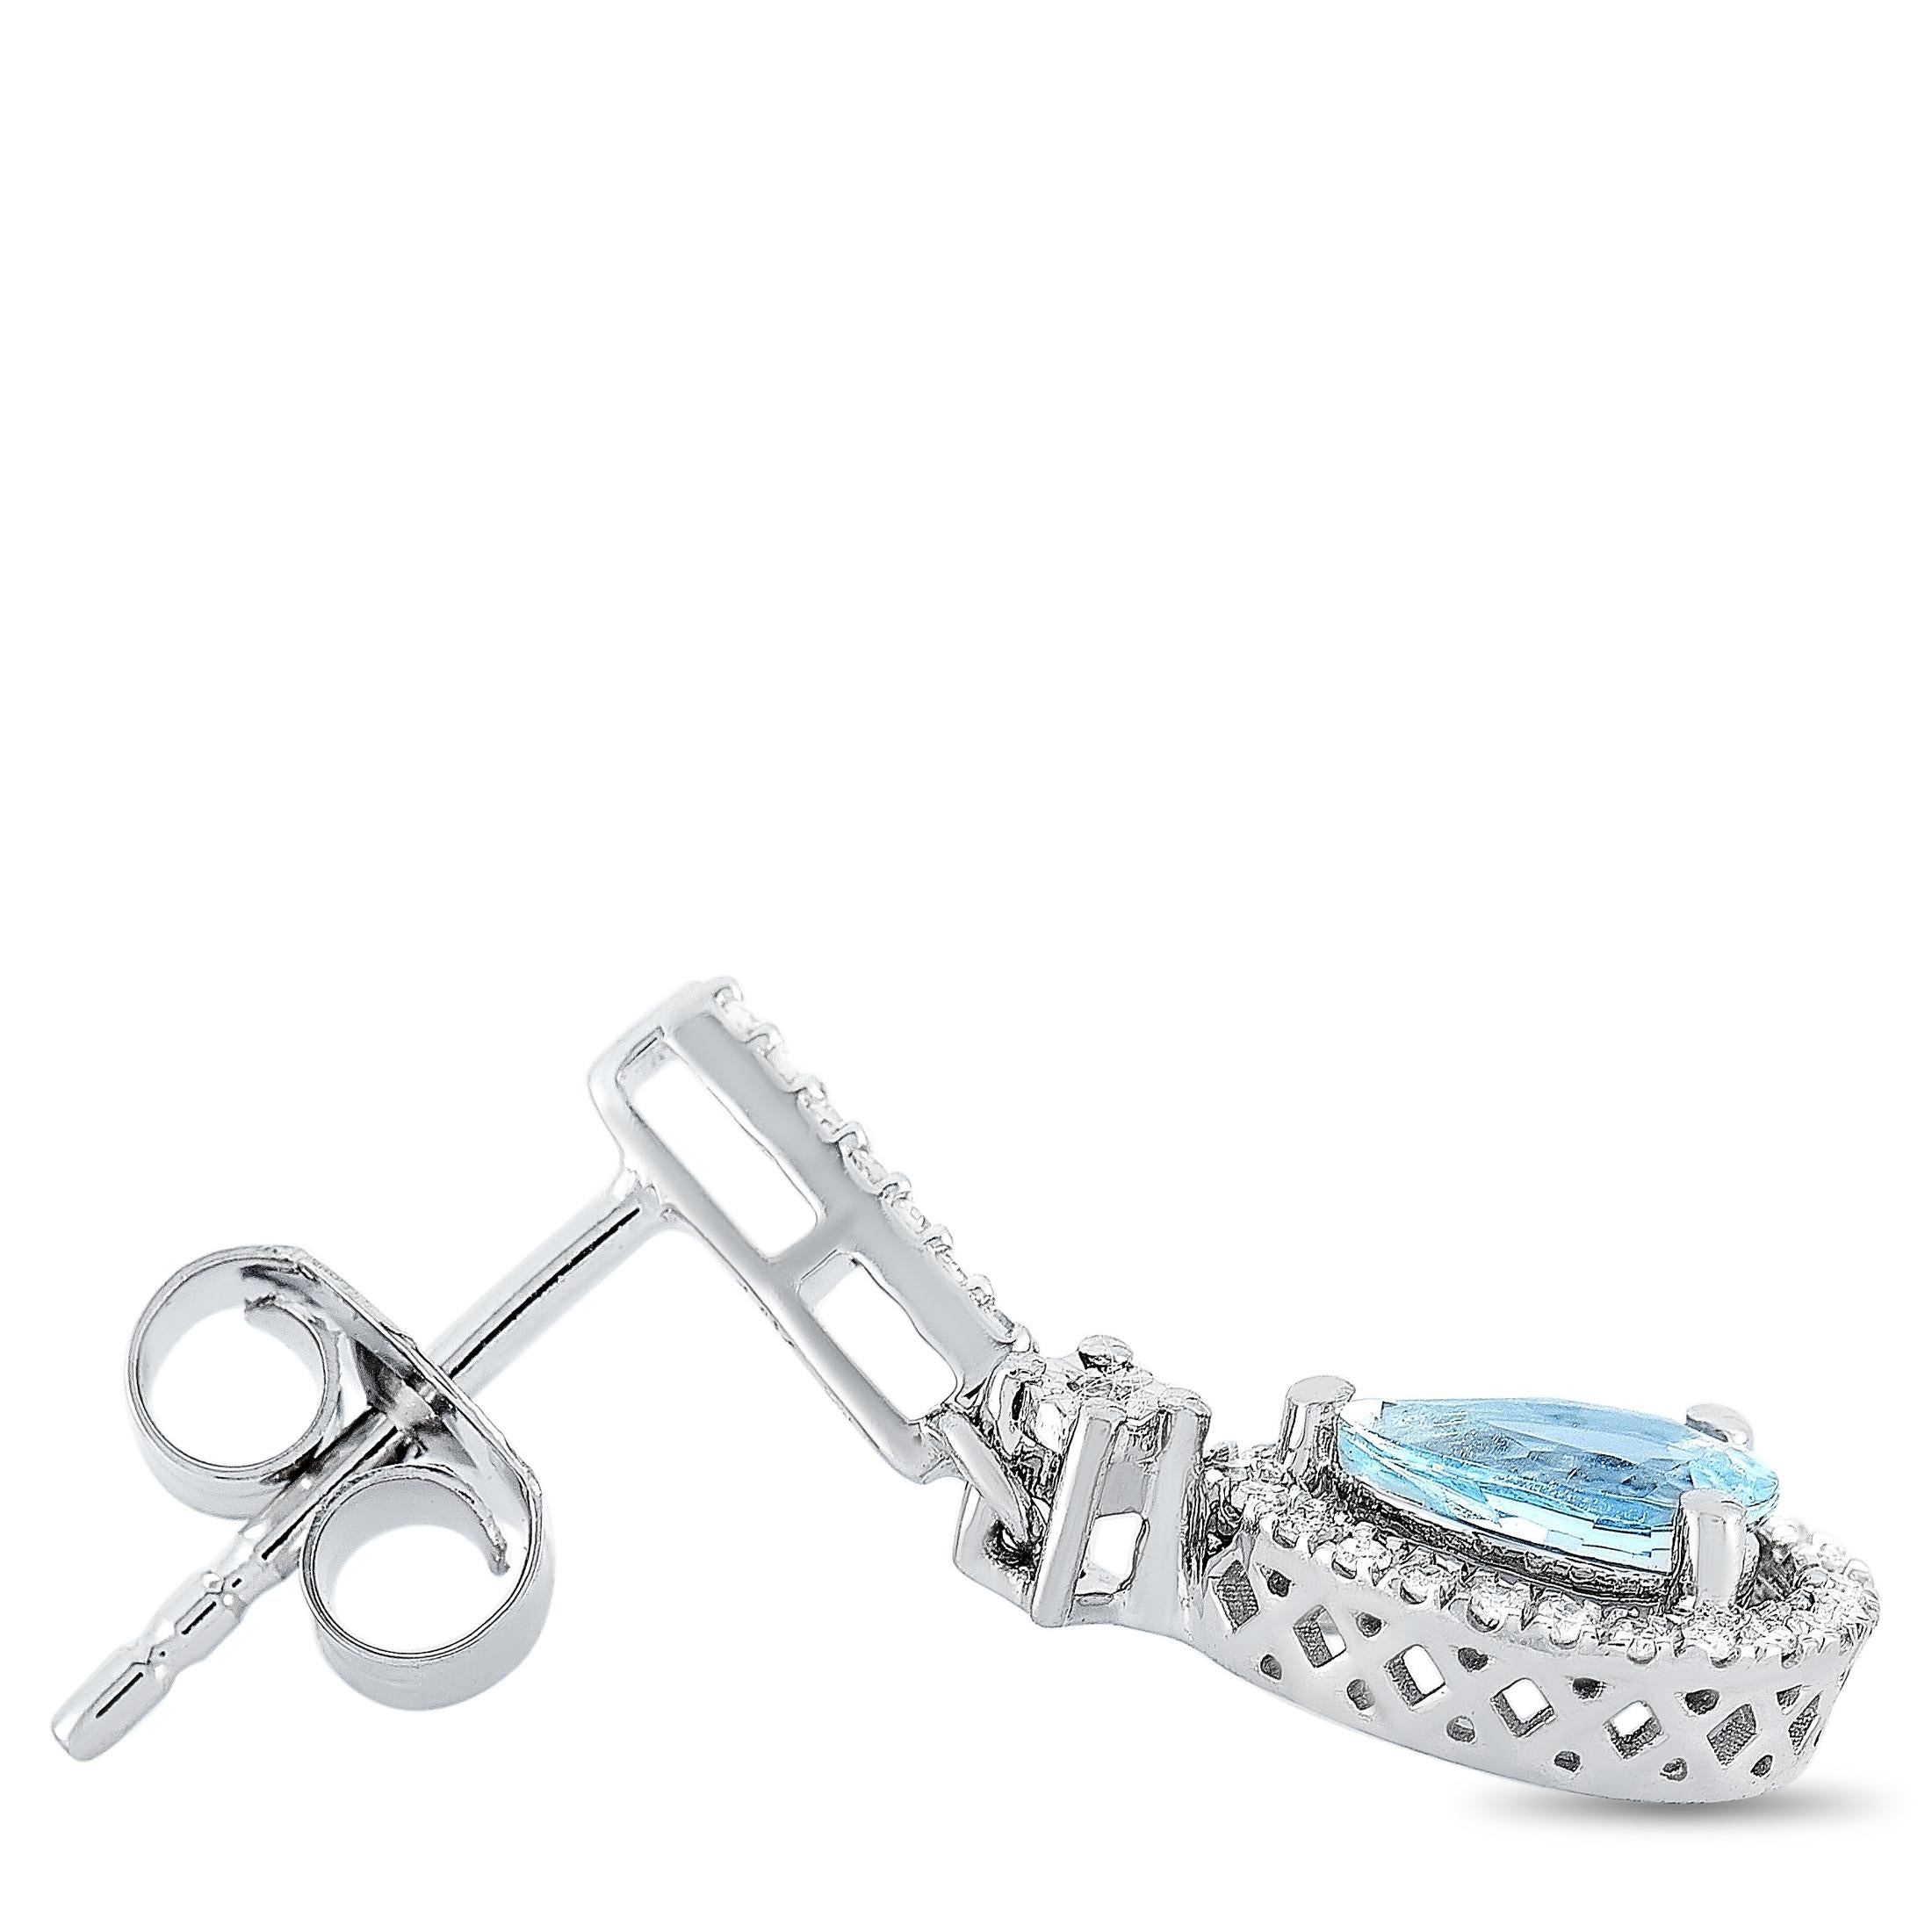 These LB Exclusive earrings are made of 14K white gold and each of the two weighs 1.25 grams. They measure 0.8 in length and 0.25 in width. The pair is embellished with diamonds and aquamarines that total 0.20 carats.The earrings are offered in